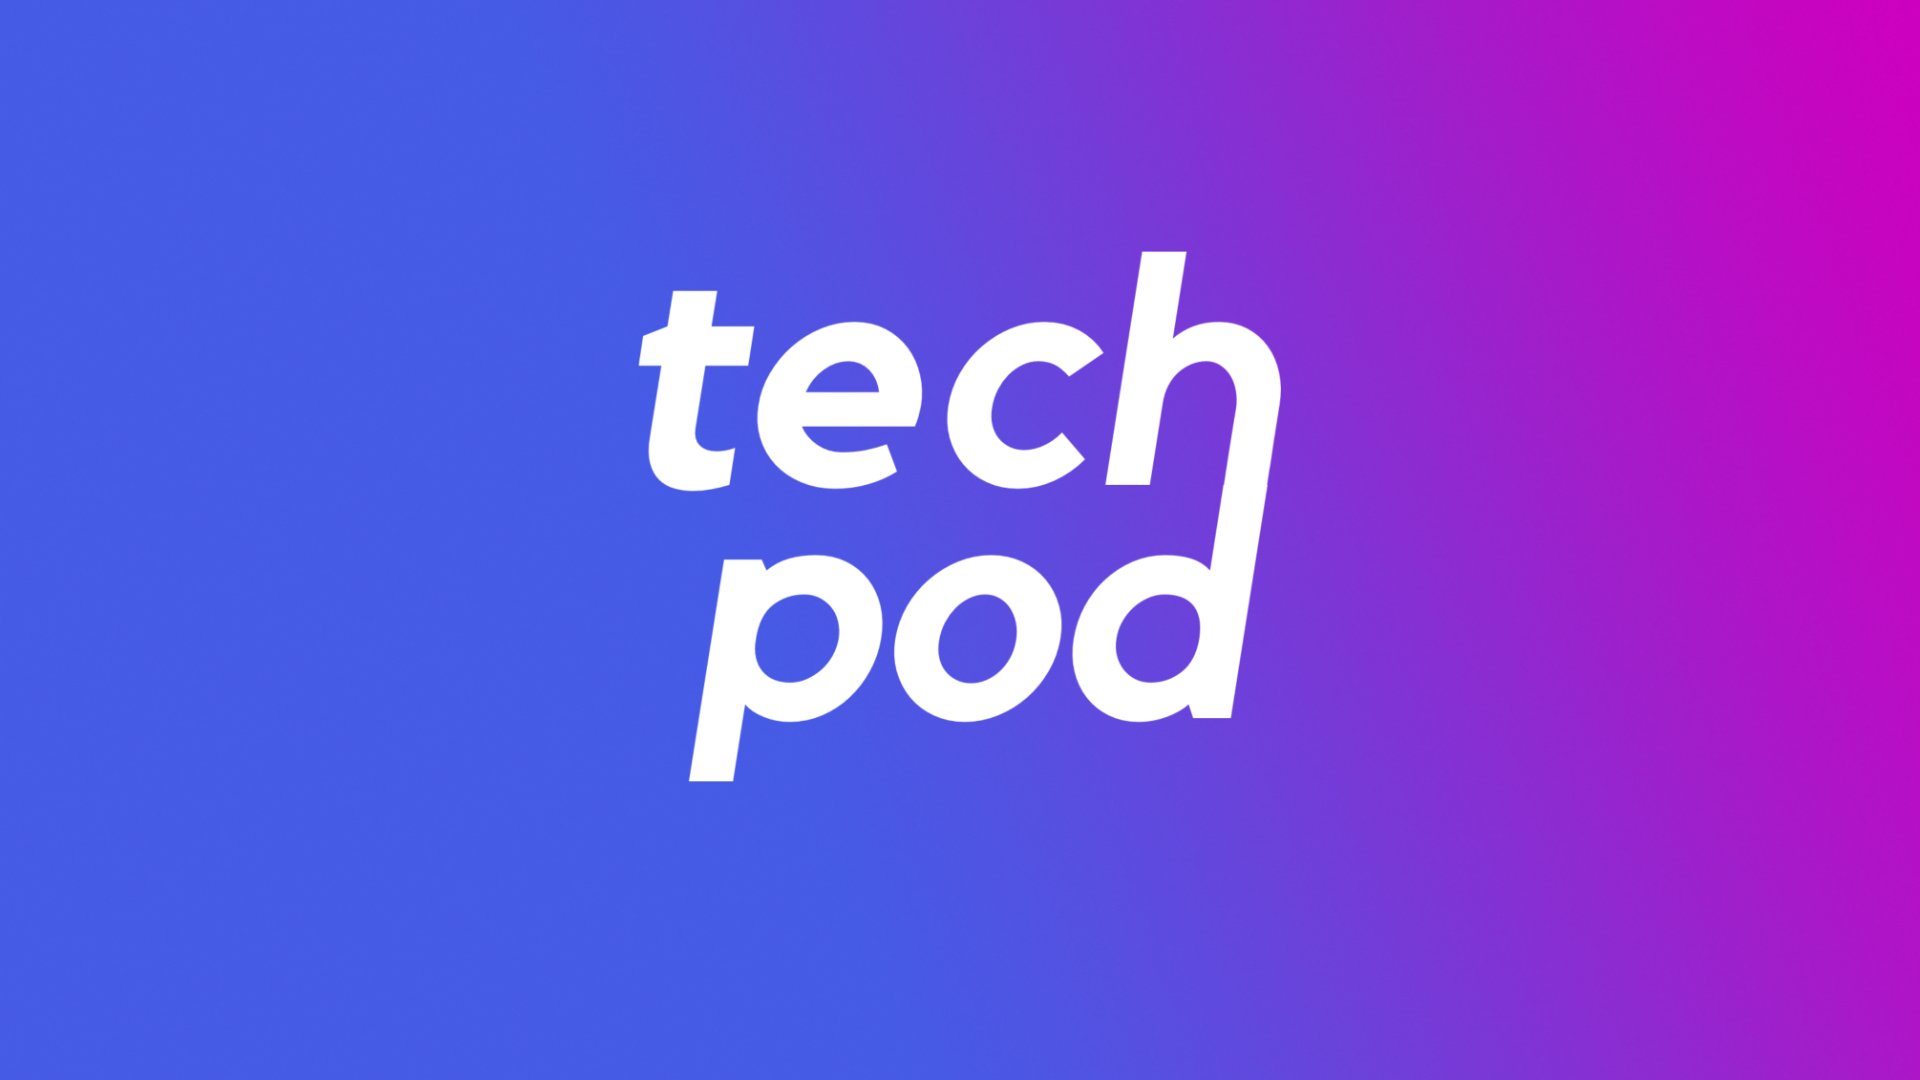 Welcome to the new TechPod